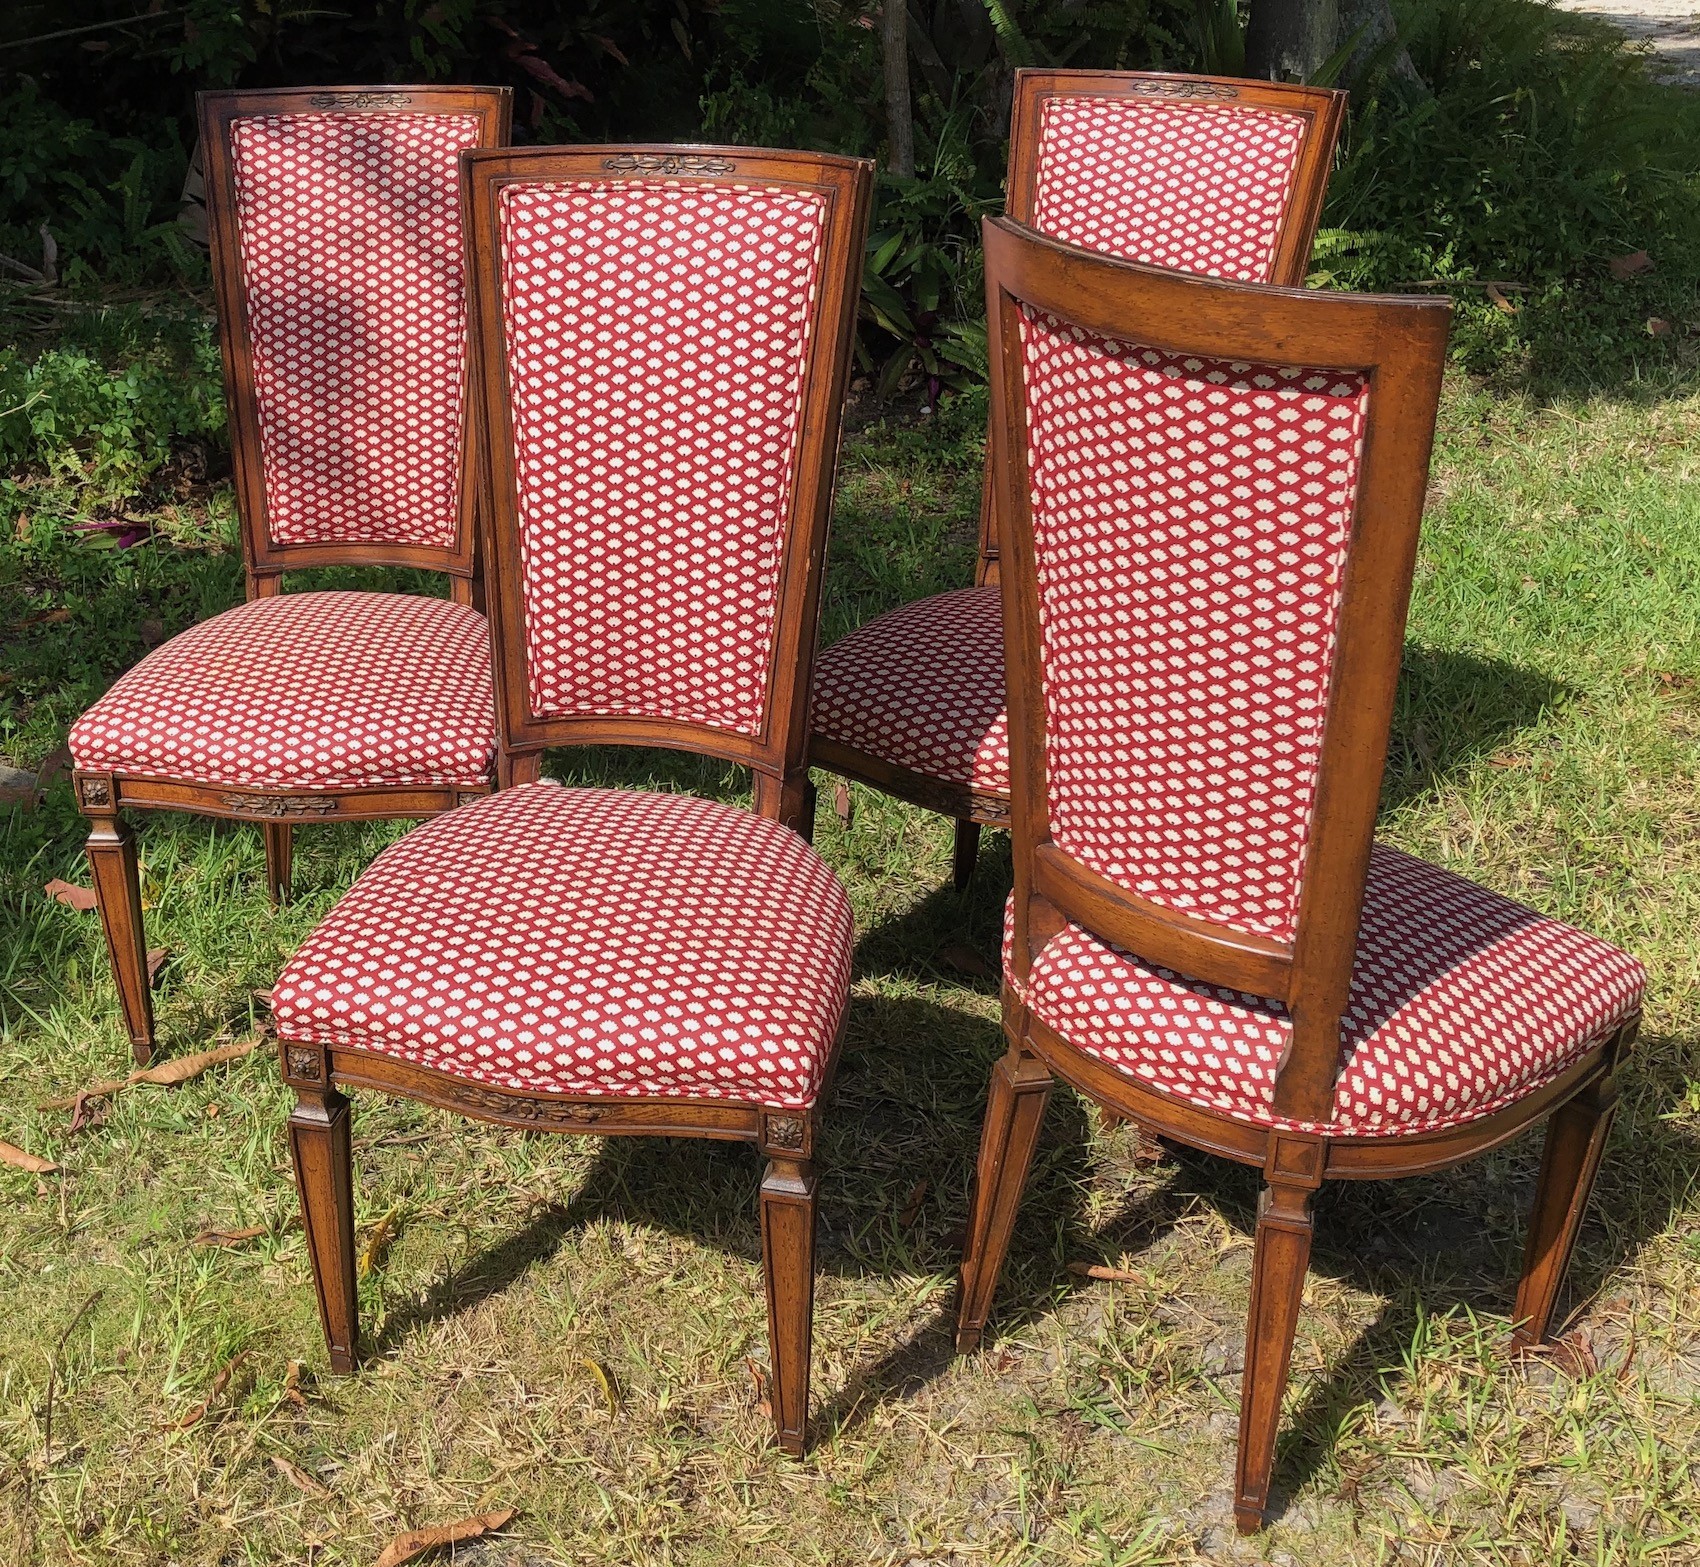 A set of 4 side chairs